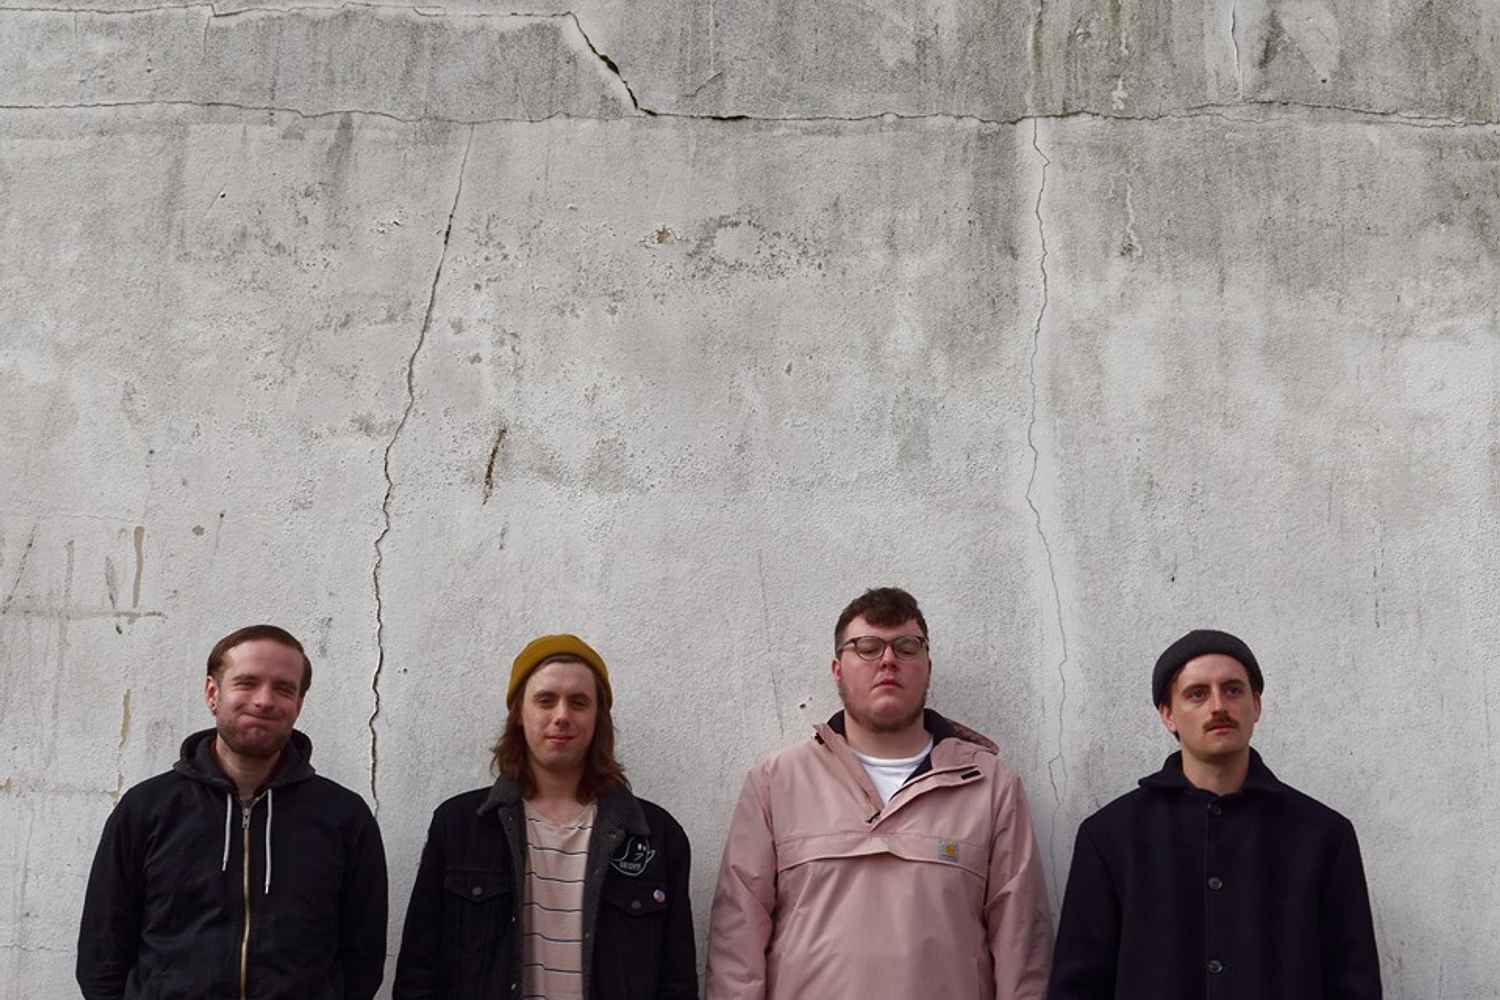 Listen to the crunchy emo/indie hybrid of Don’t Worry’s debut album